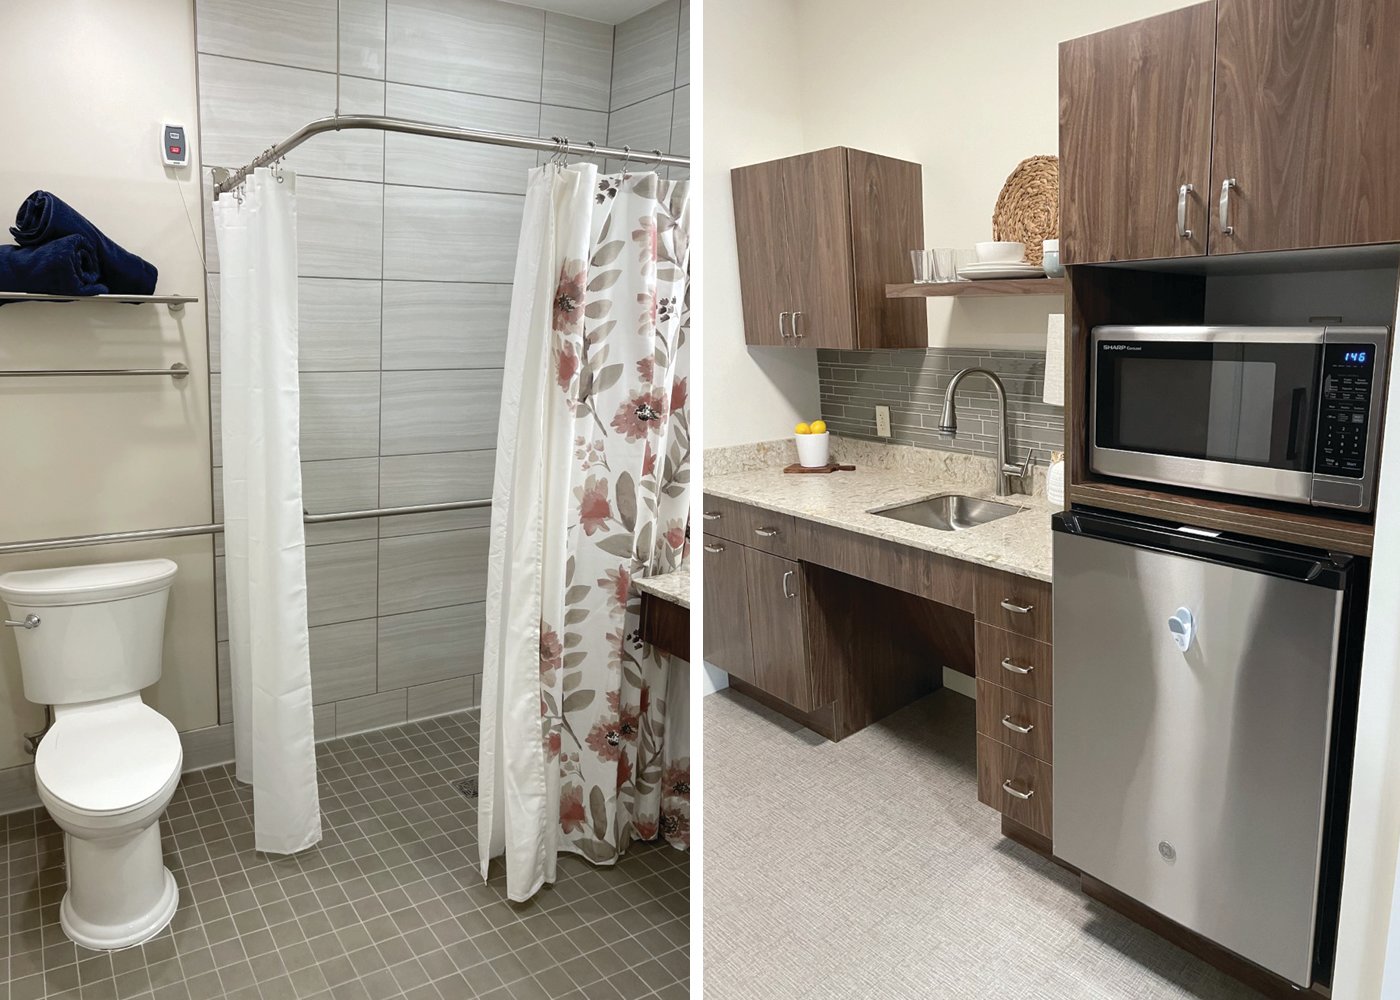 The Preserve at Briarcliffe in Johnston features adapted bathrooms and kitchenettes, perfect for independent senior living. Set in the serene woods of the city, The Preserve is a Continuing Care Retirement Community ~ and your potential new home!